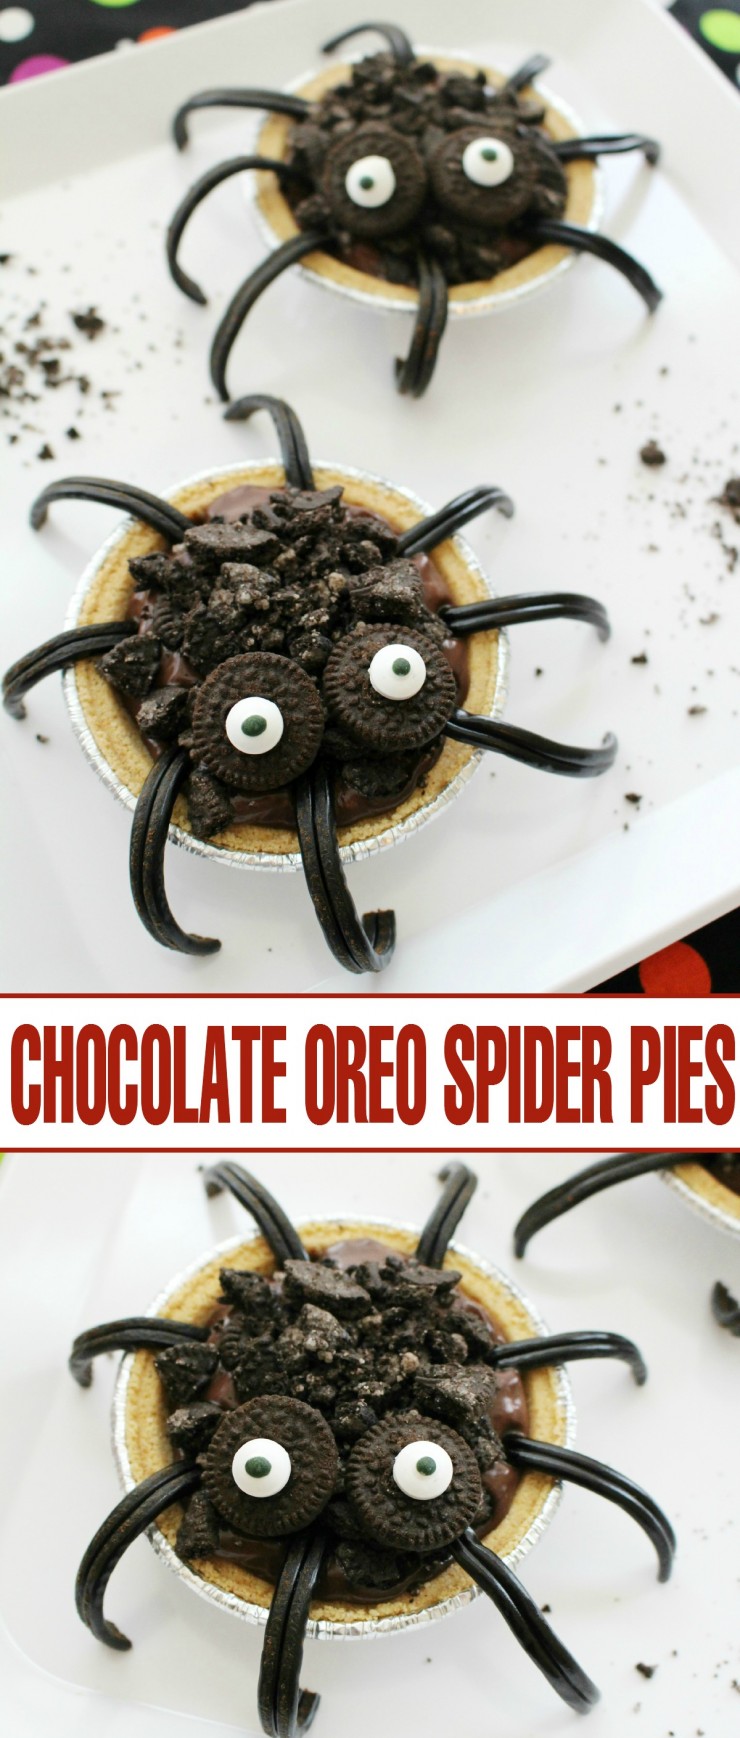 These Chocolate Oreo Spider Pies would make for an easy and fun food craft for kids to make at a Halloween party!